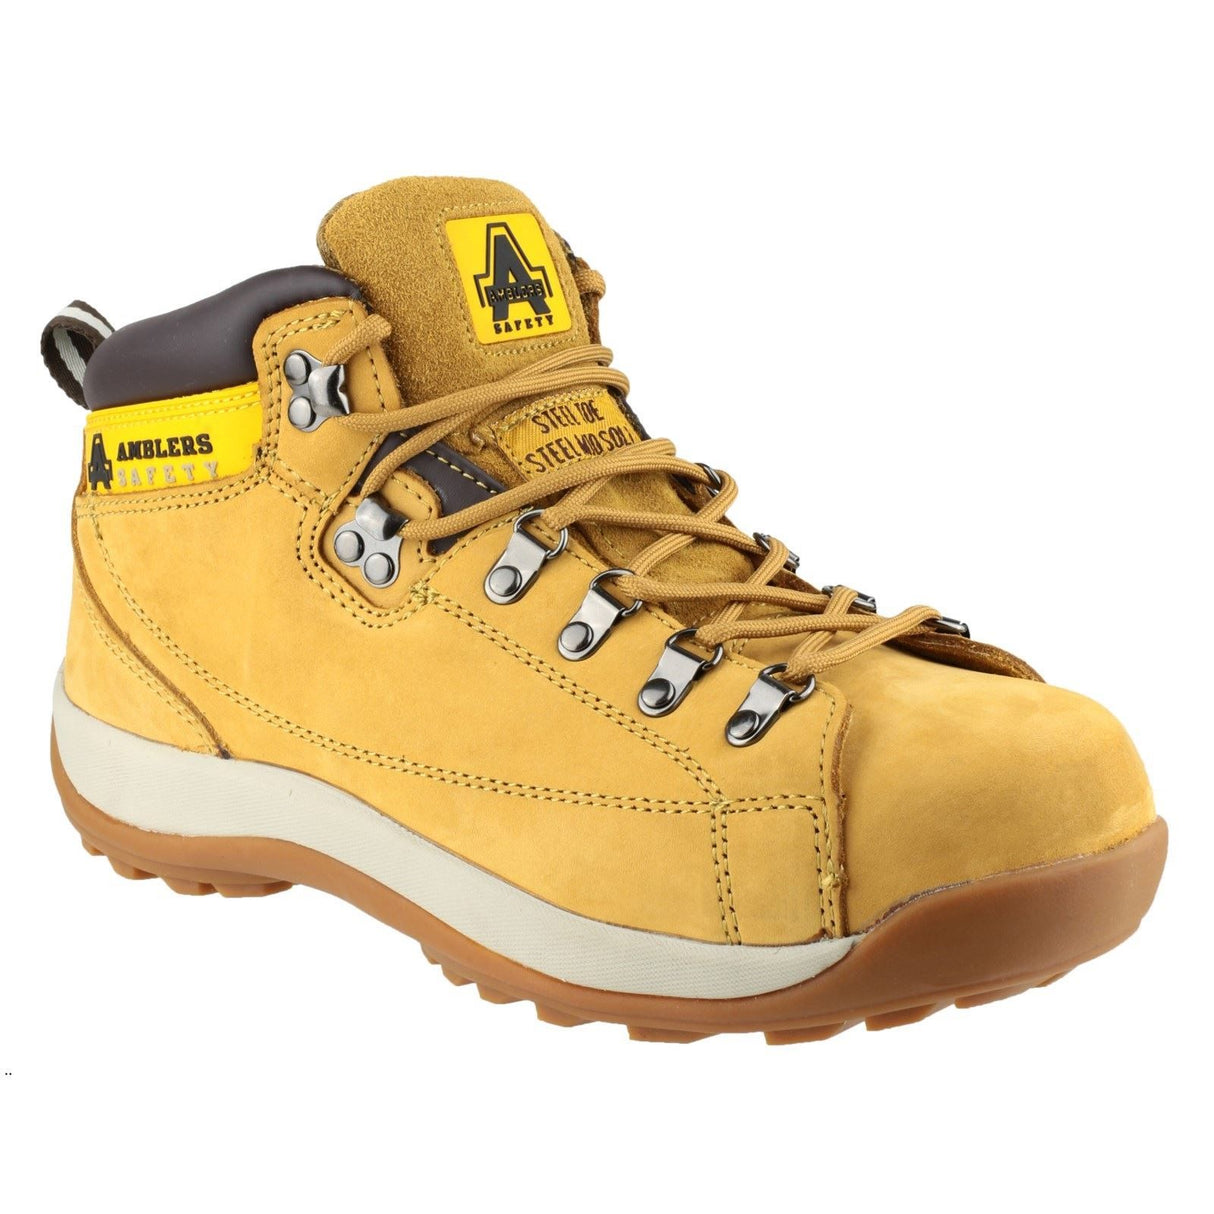 Amblers Safety Hardwearing Lace Up Safety Boots